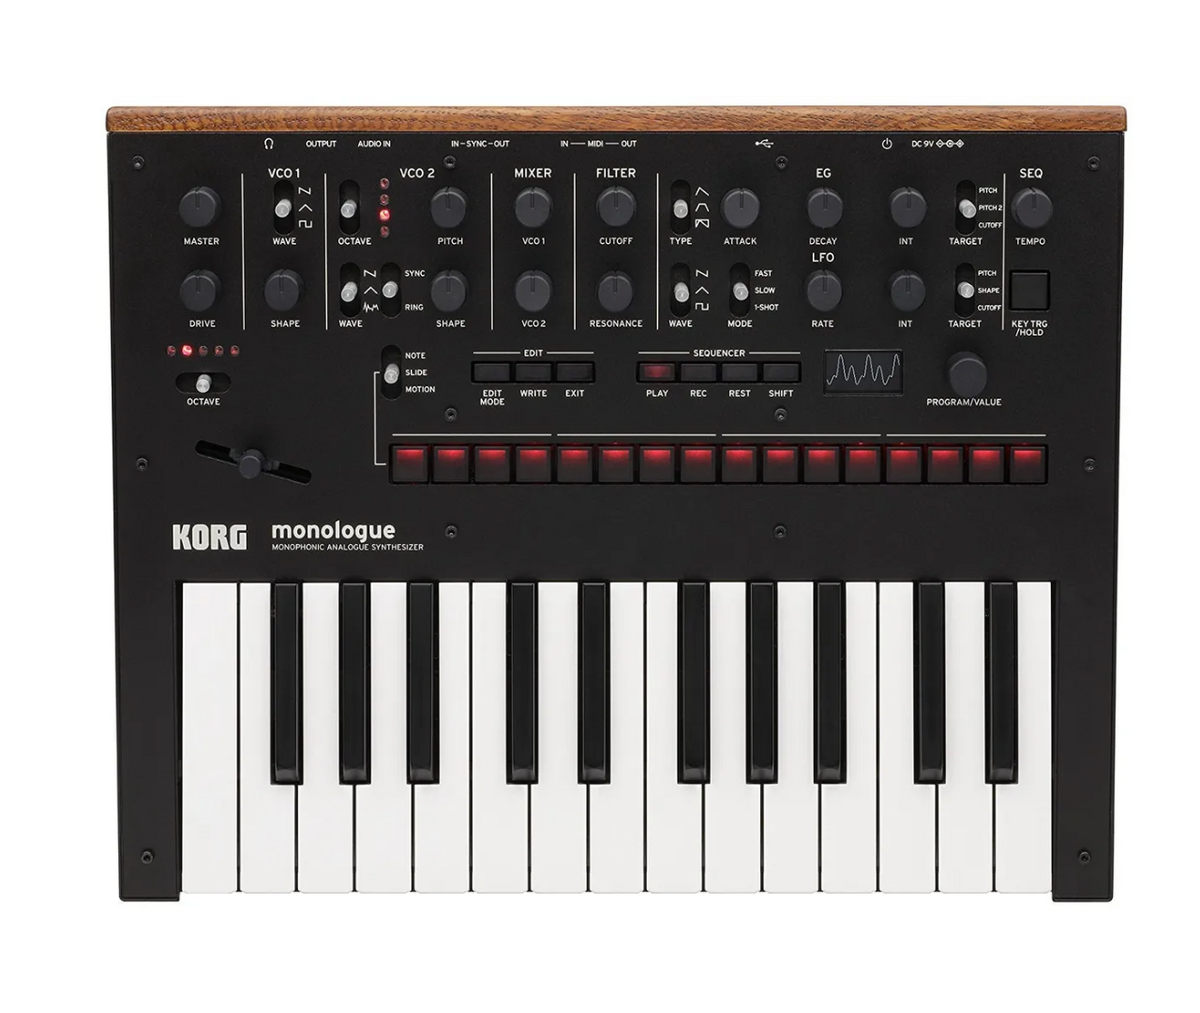 KORG monologue Monophonic Analogue Best Sound Synthesizer Keyboard Fully Programmable with 100 Program Memories and 80 Presets Included